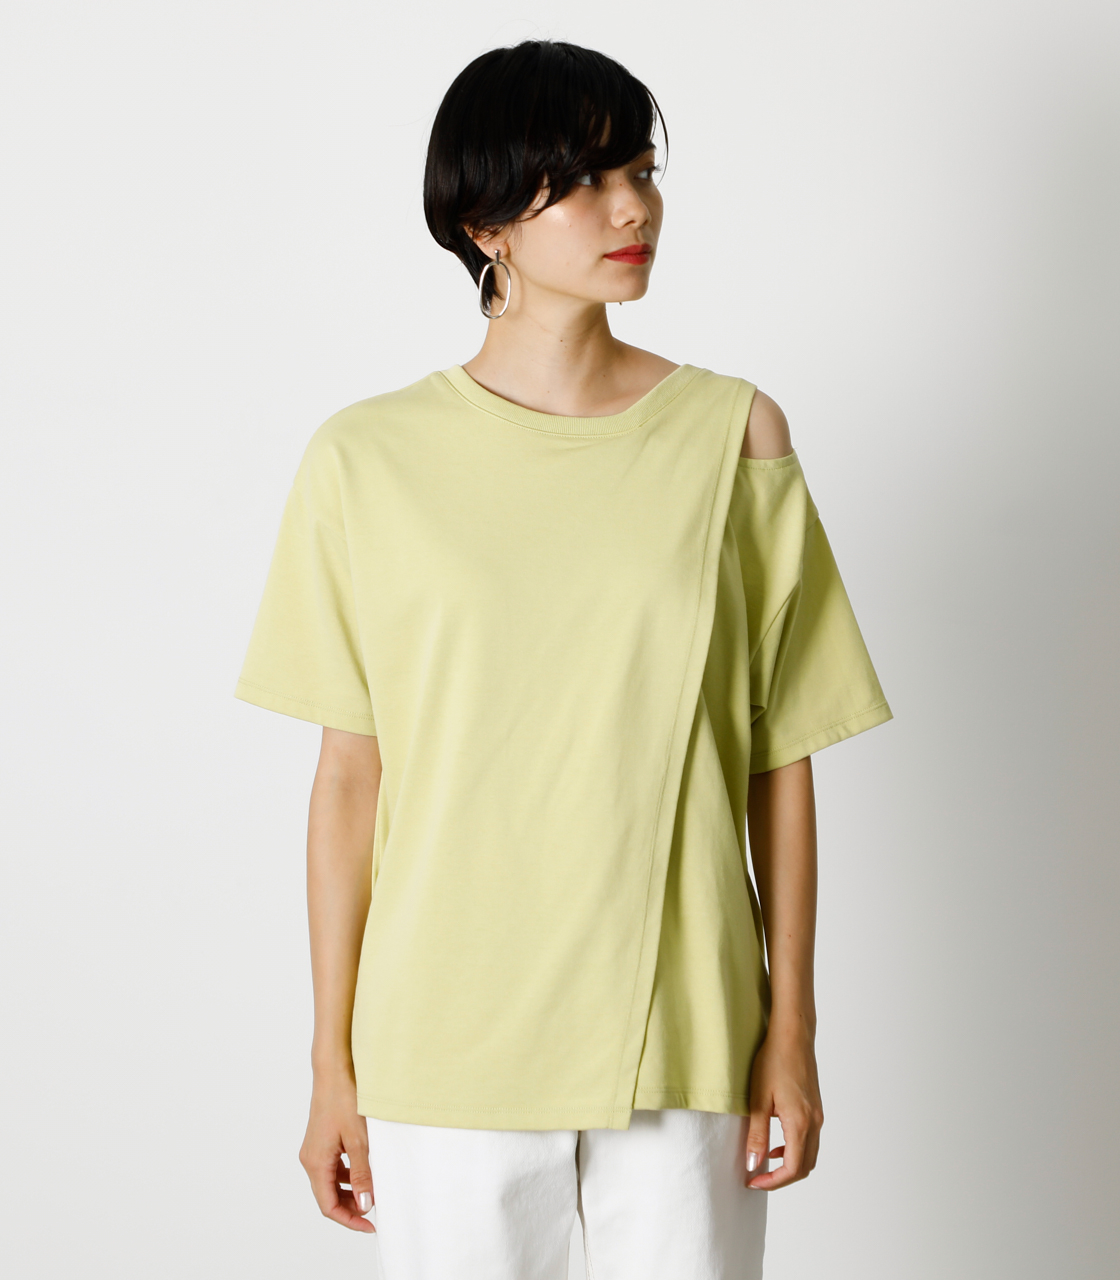 BIG LAYERED TOPS/ビッグレイヤードトップス 詳細画像 LIME 4